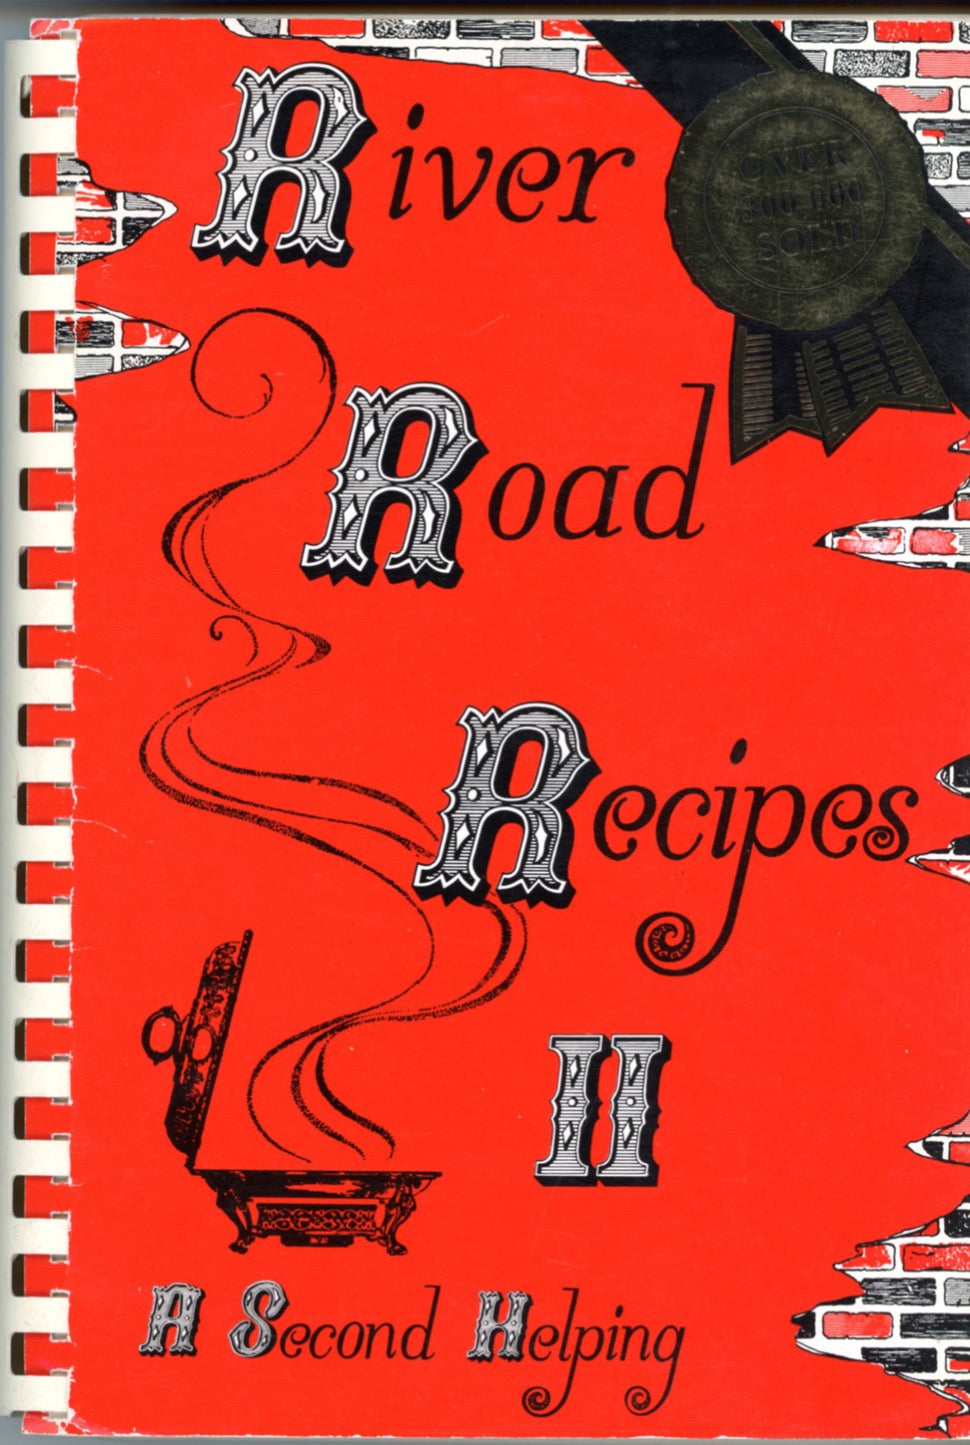 RIVER ROAD RECIPES II: A Second Helping | Junior League of Baton Rouge | 1986 ©1976